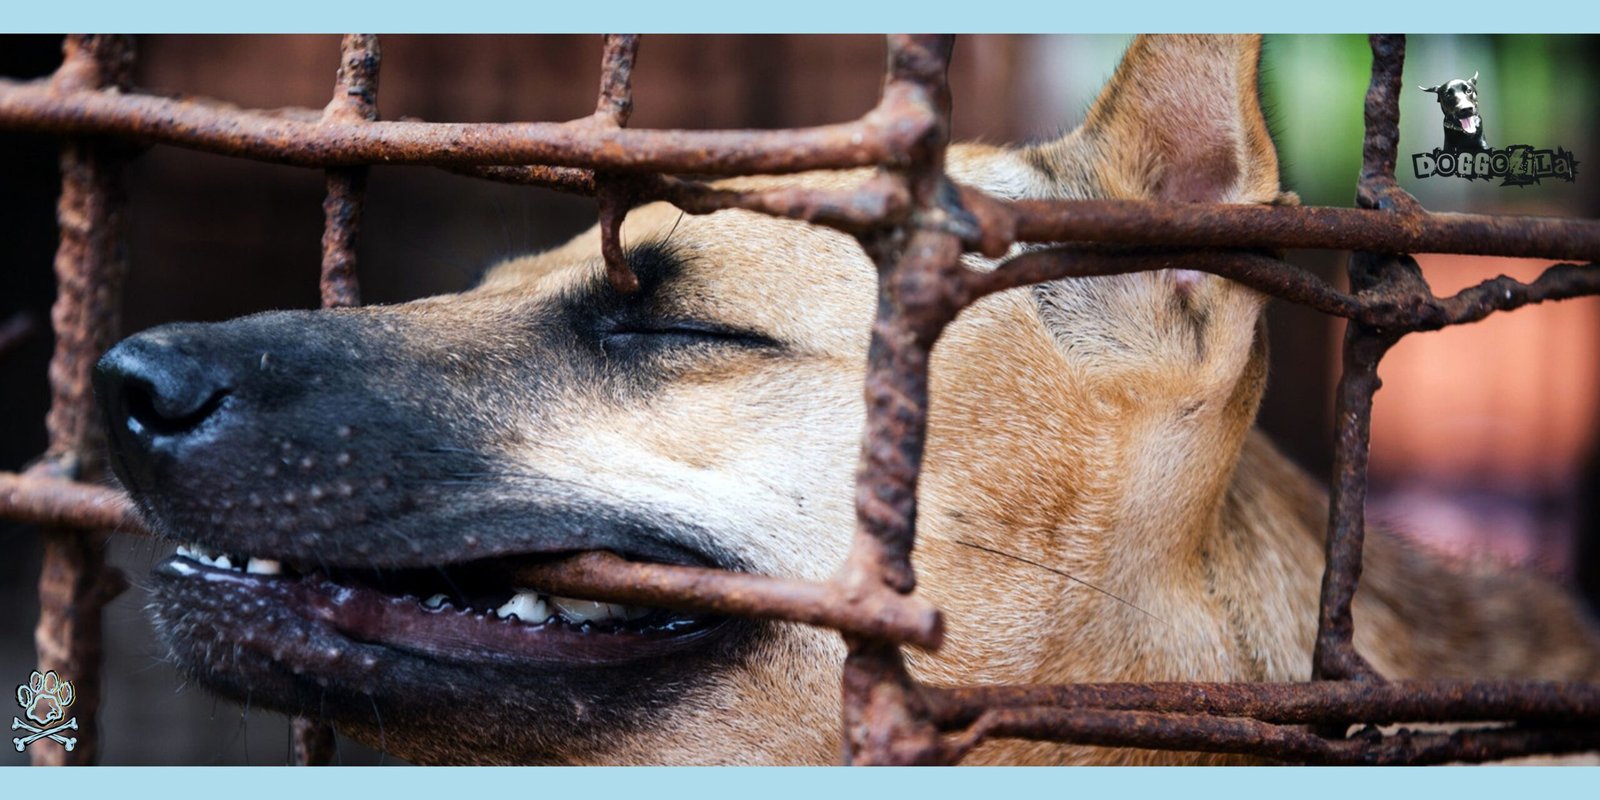 THE DOG MEAT TRADE IN ASIA